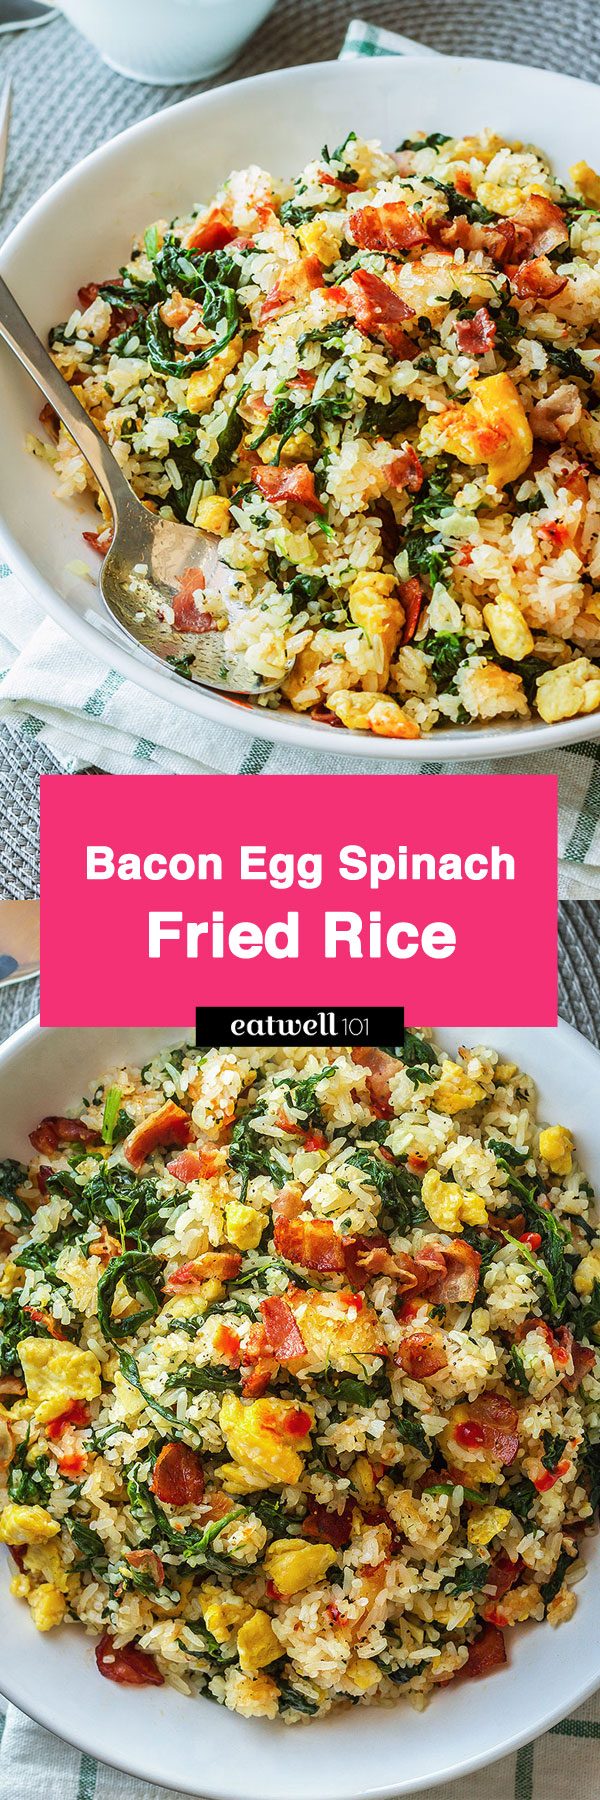 Bacon Egg and Spinach Fried Rice — Delicious, nourishing and only 20 minutes to make!